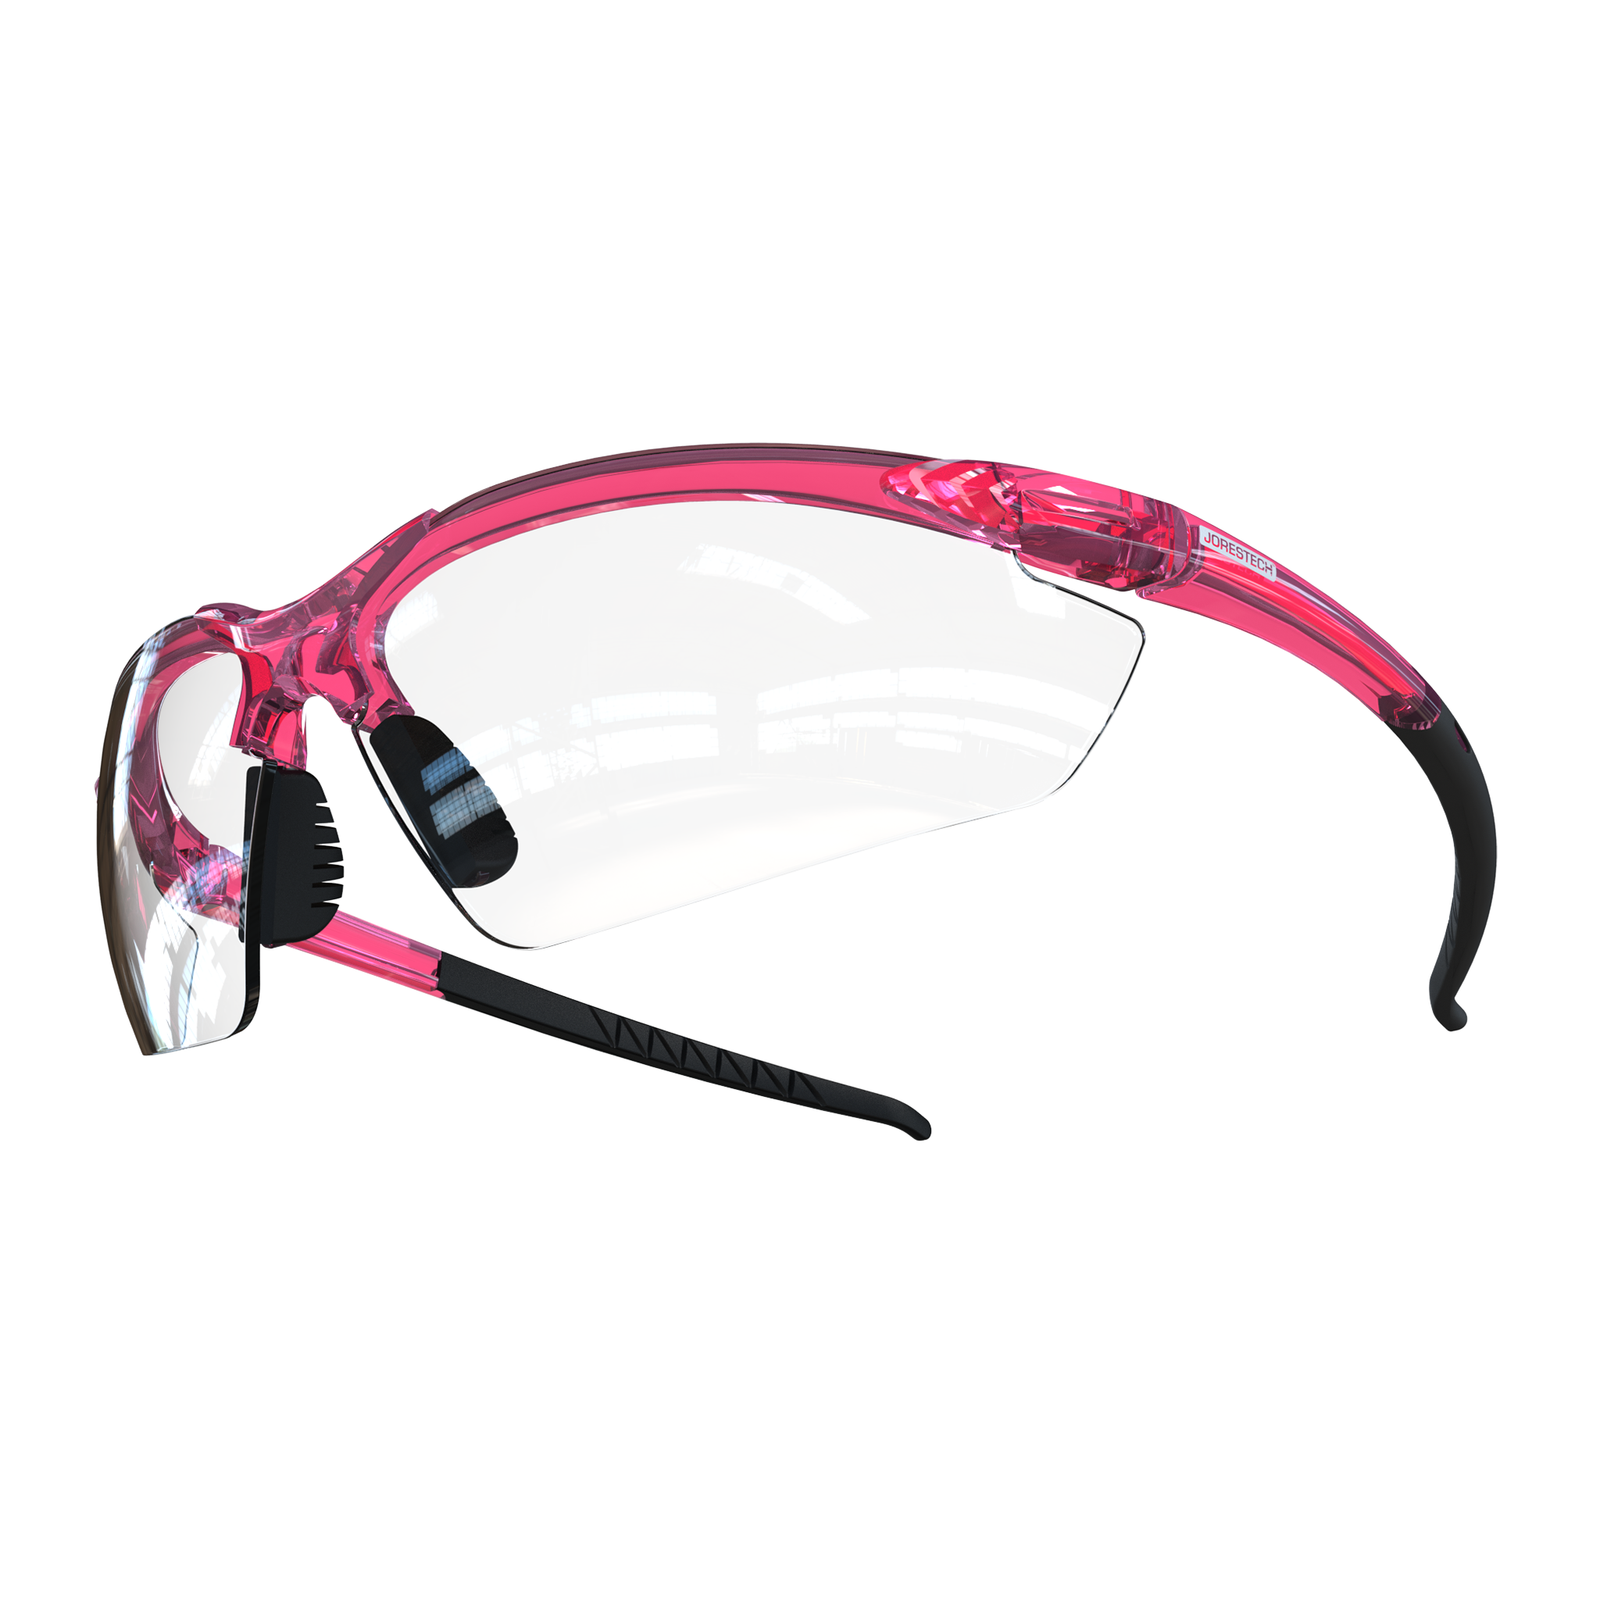 PinkFit high impact safety glasses for personal protection equipment